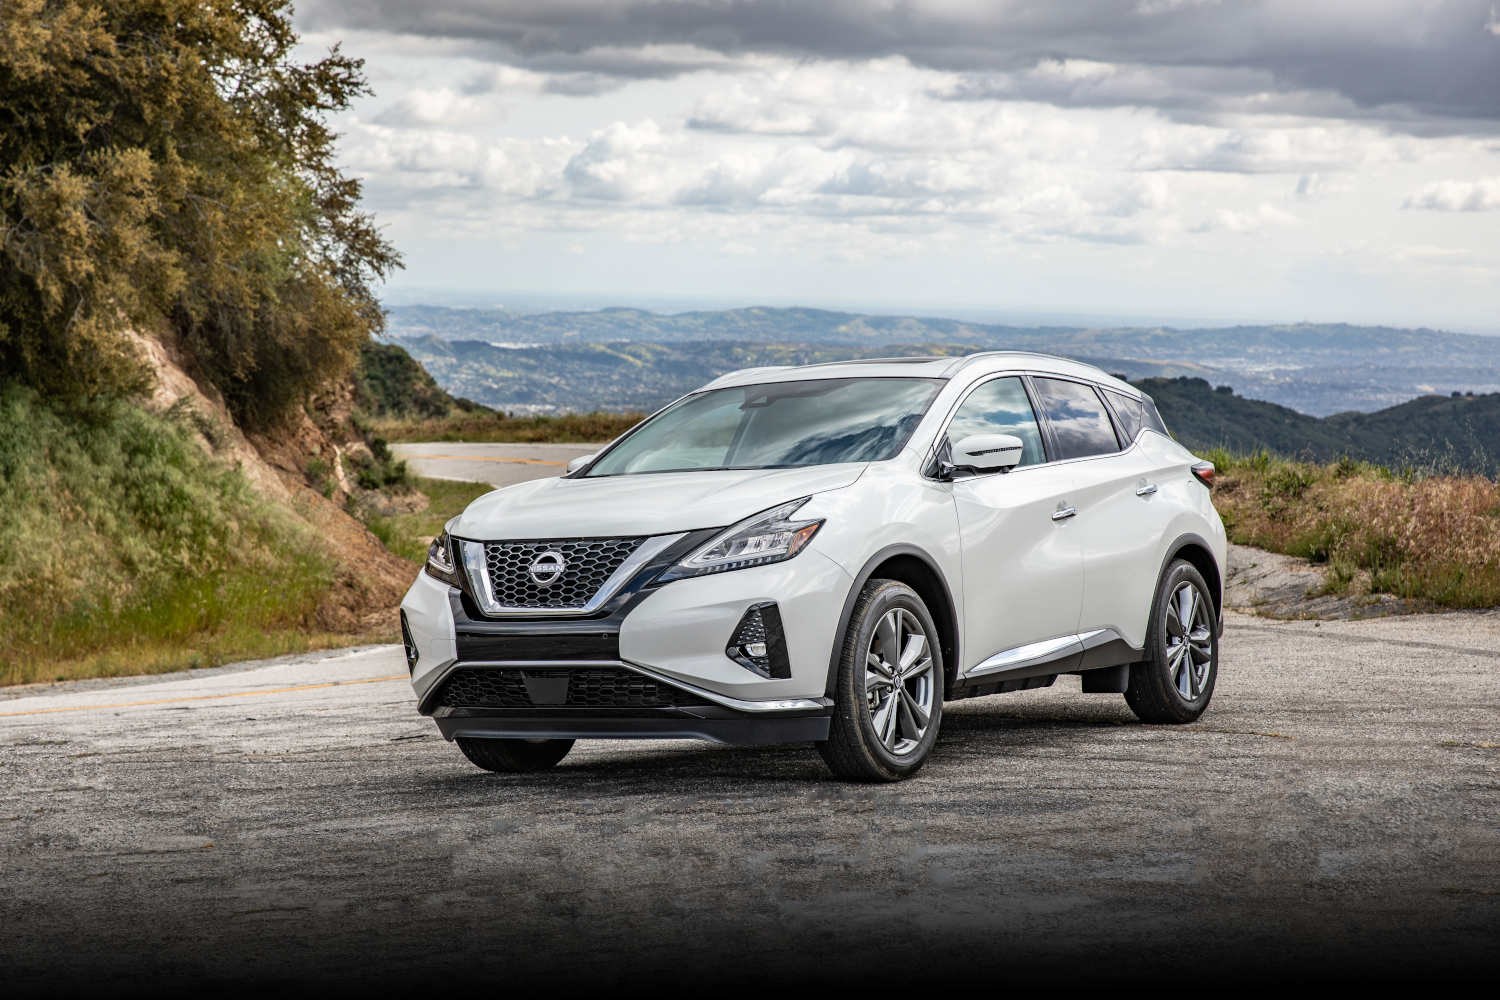 The SUVs for the money include the reliable Nissan Murano